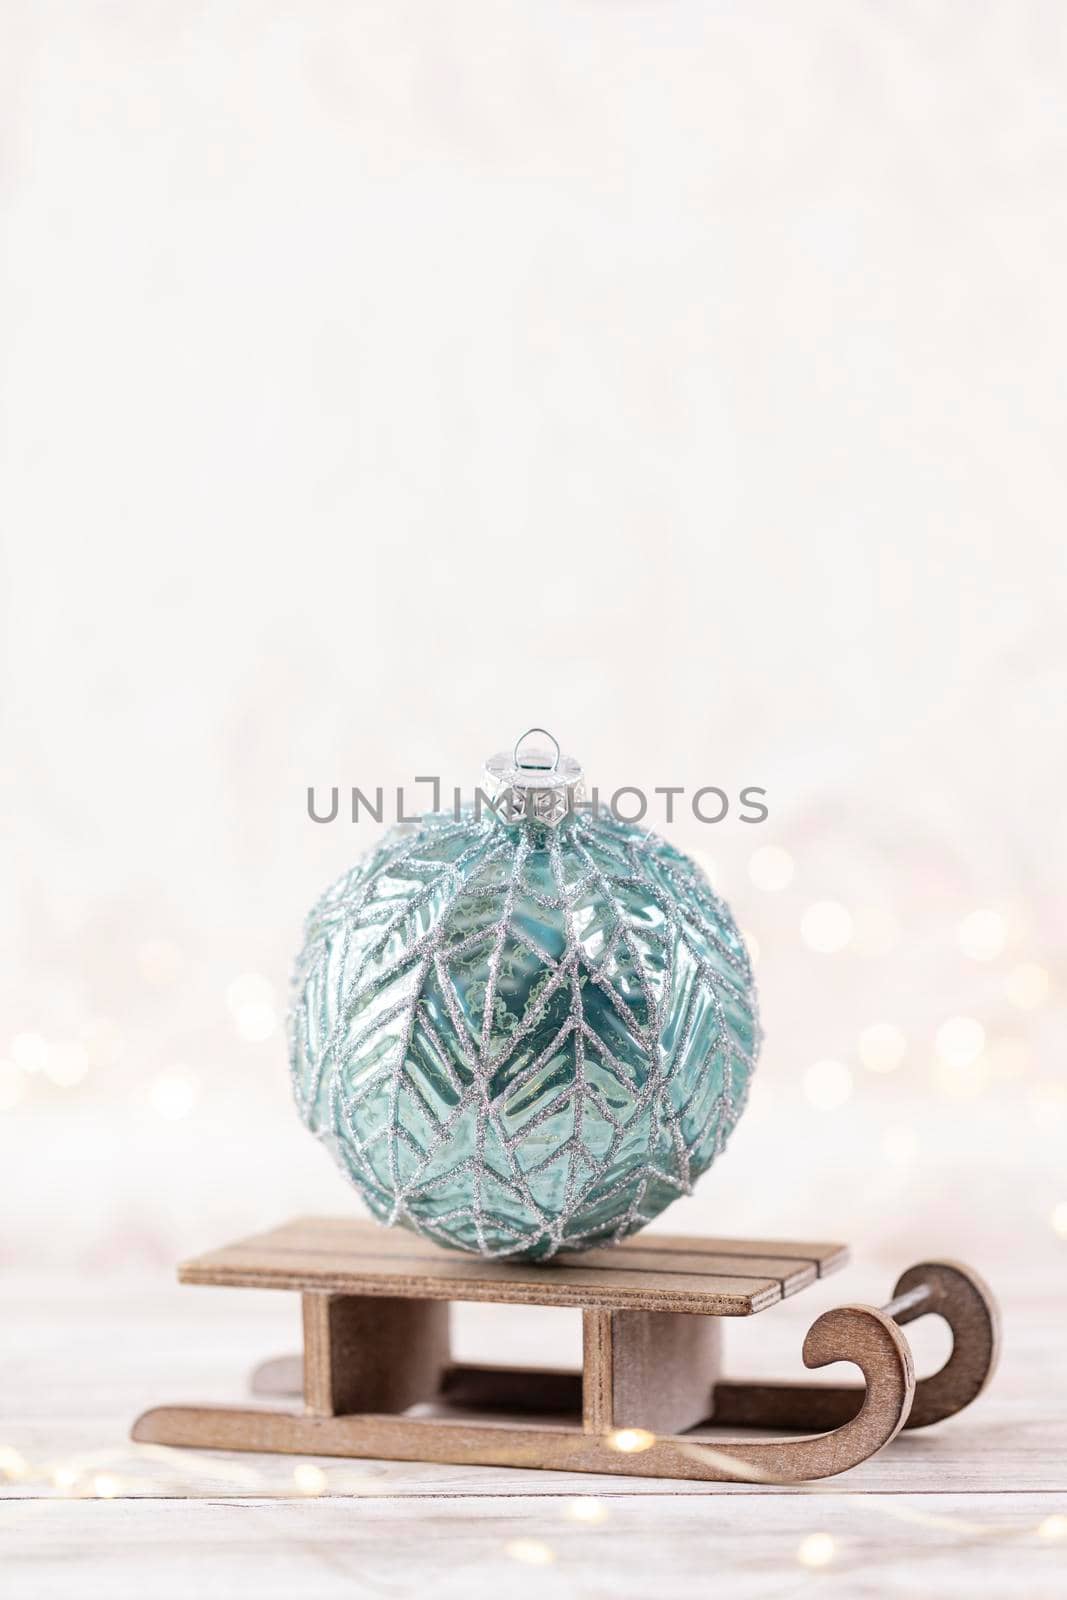 Christmas and newyear cozy decoration, bokeh background.